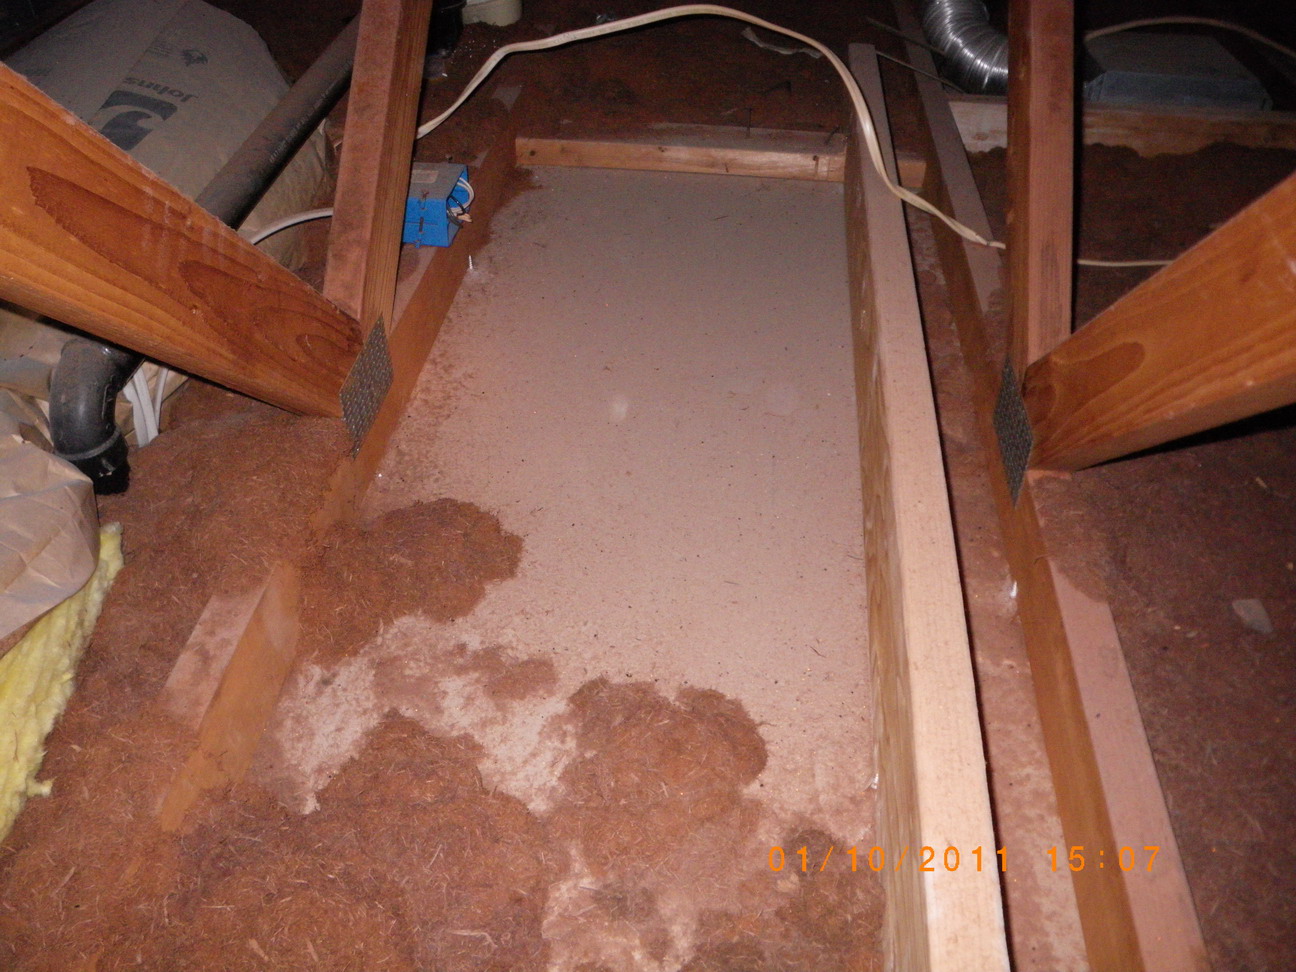 Frequently in attics we will find that someone working in the attic, either installing a new light fixture, a ceiling fan, or maybe some speakers, had to move the insulation out of the way, then forgot to put it back when they were done. Now there is a huge hole in the insulation that is allowing large amounts of heat to escape through your ceiling into your attic.